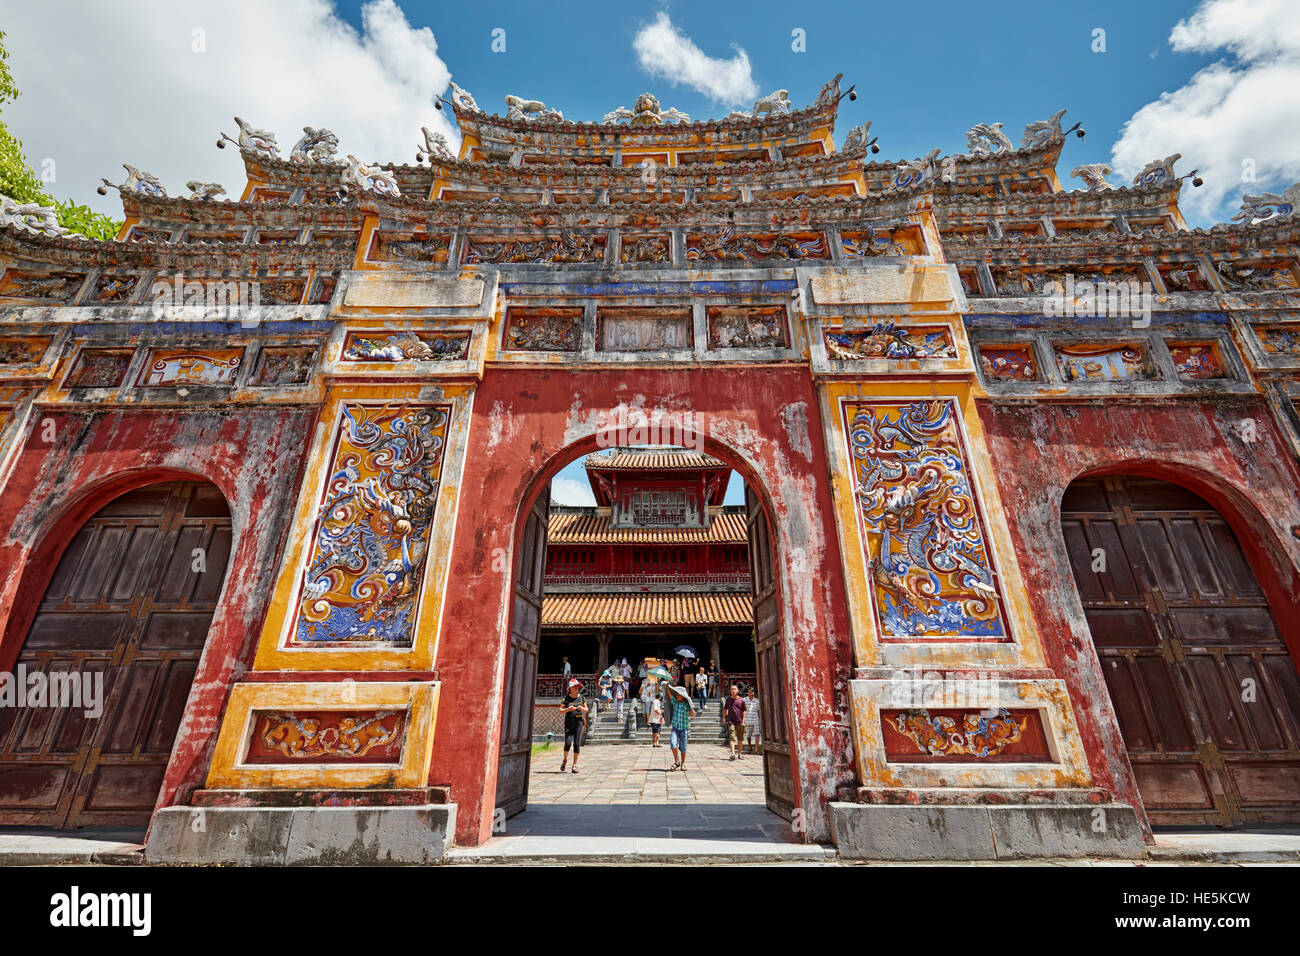 Entrance gate to The To Mieu Temple Compound. Imperial City (The Citadel), Hue, Vietnam. Stock Photo